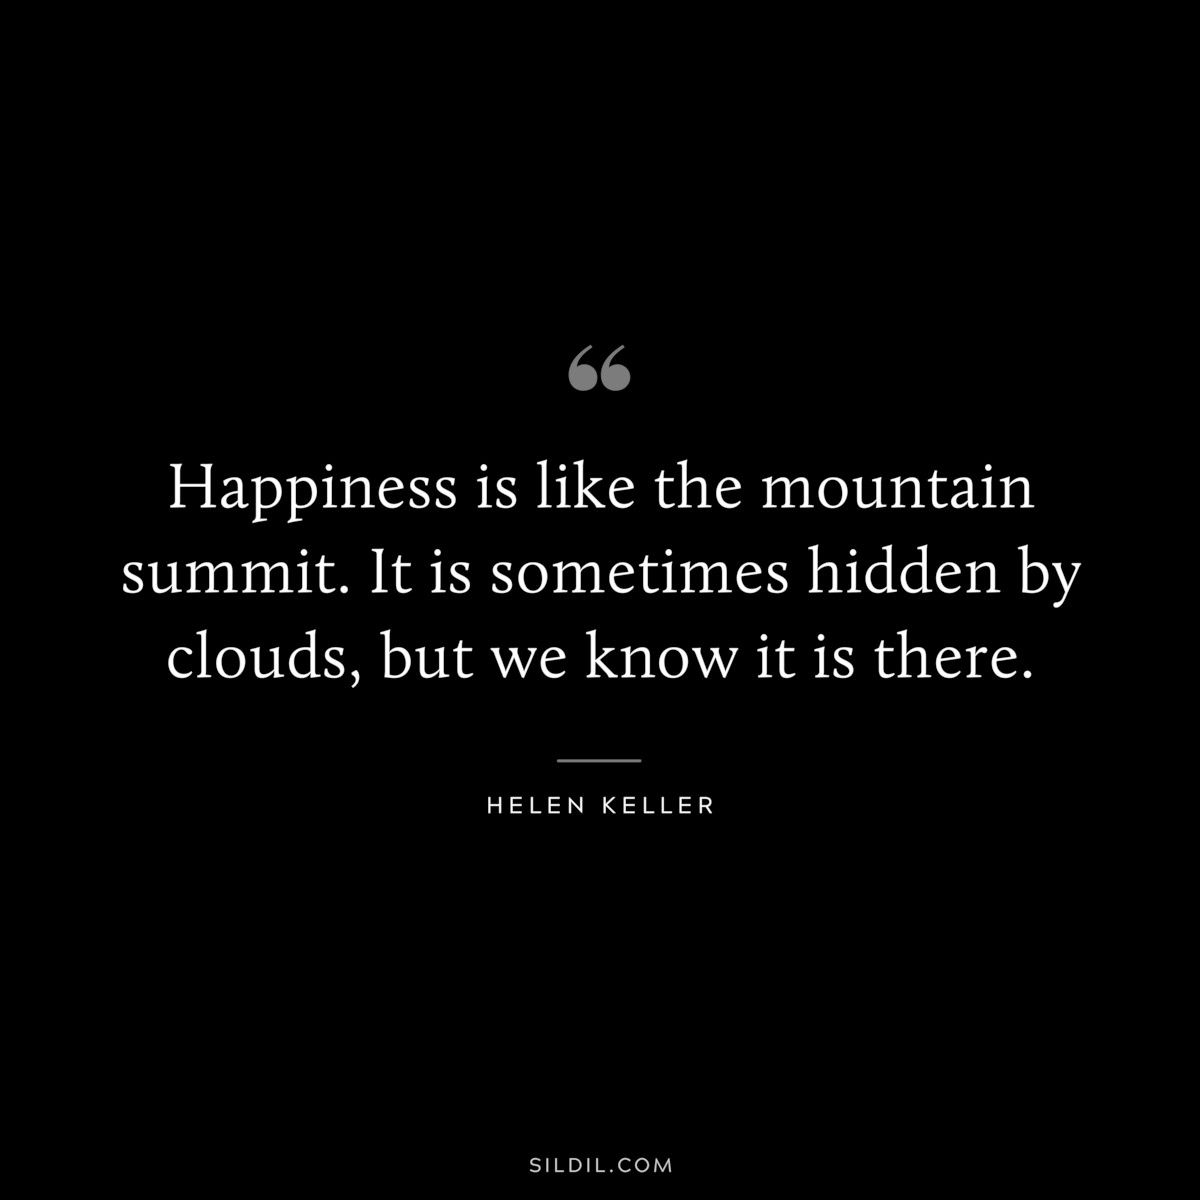 Happiness is like the mountain summit. It is sometimes hidden by clouds, but we know it is there. ― Helen Keller